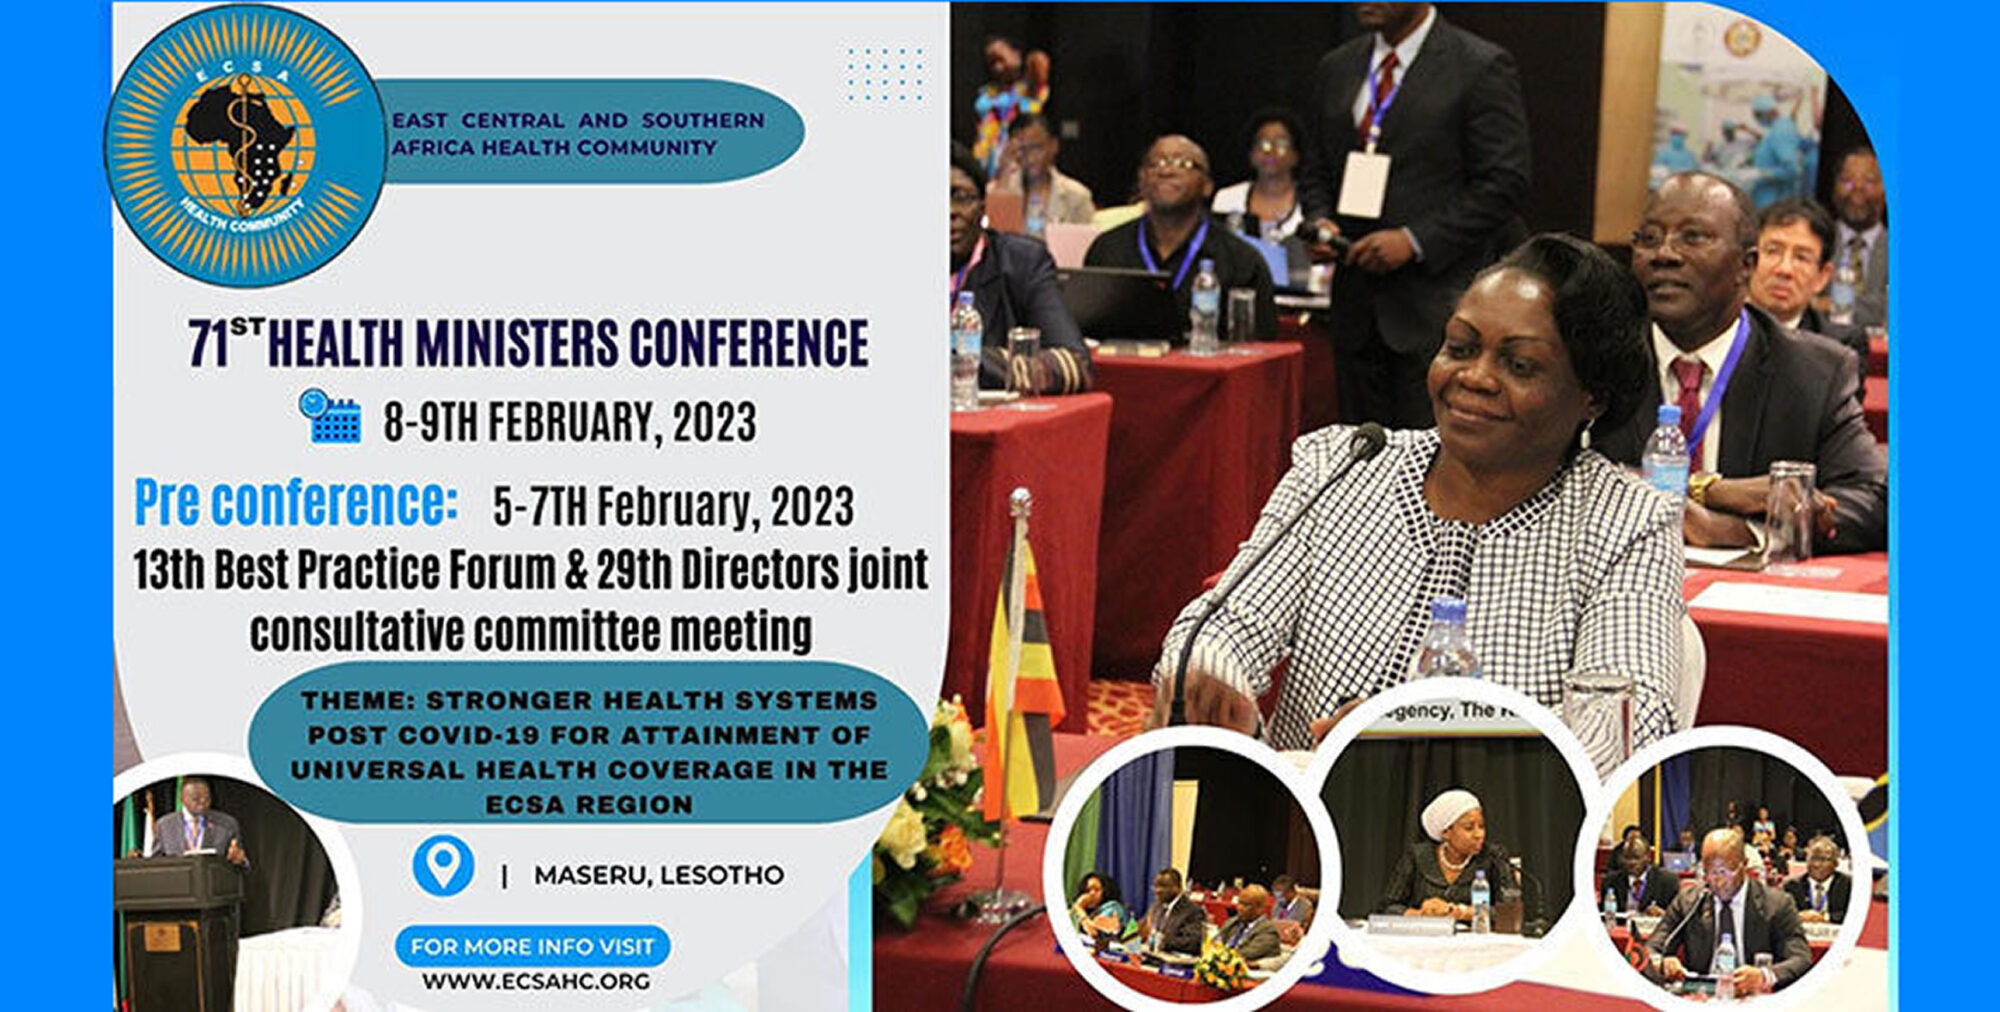 East Central and Southern Africa Health Community's 13th Best Practices Forum & 71st Health Ministers Conference poster